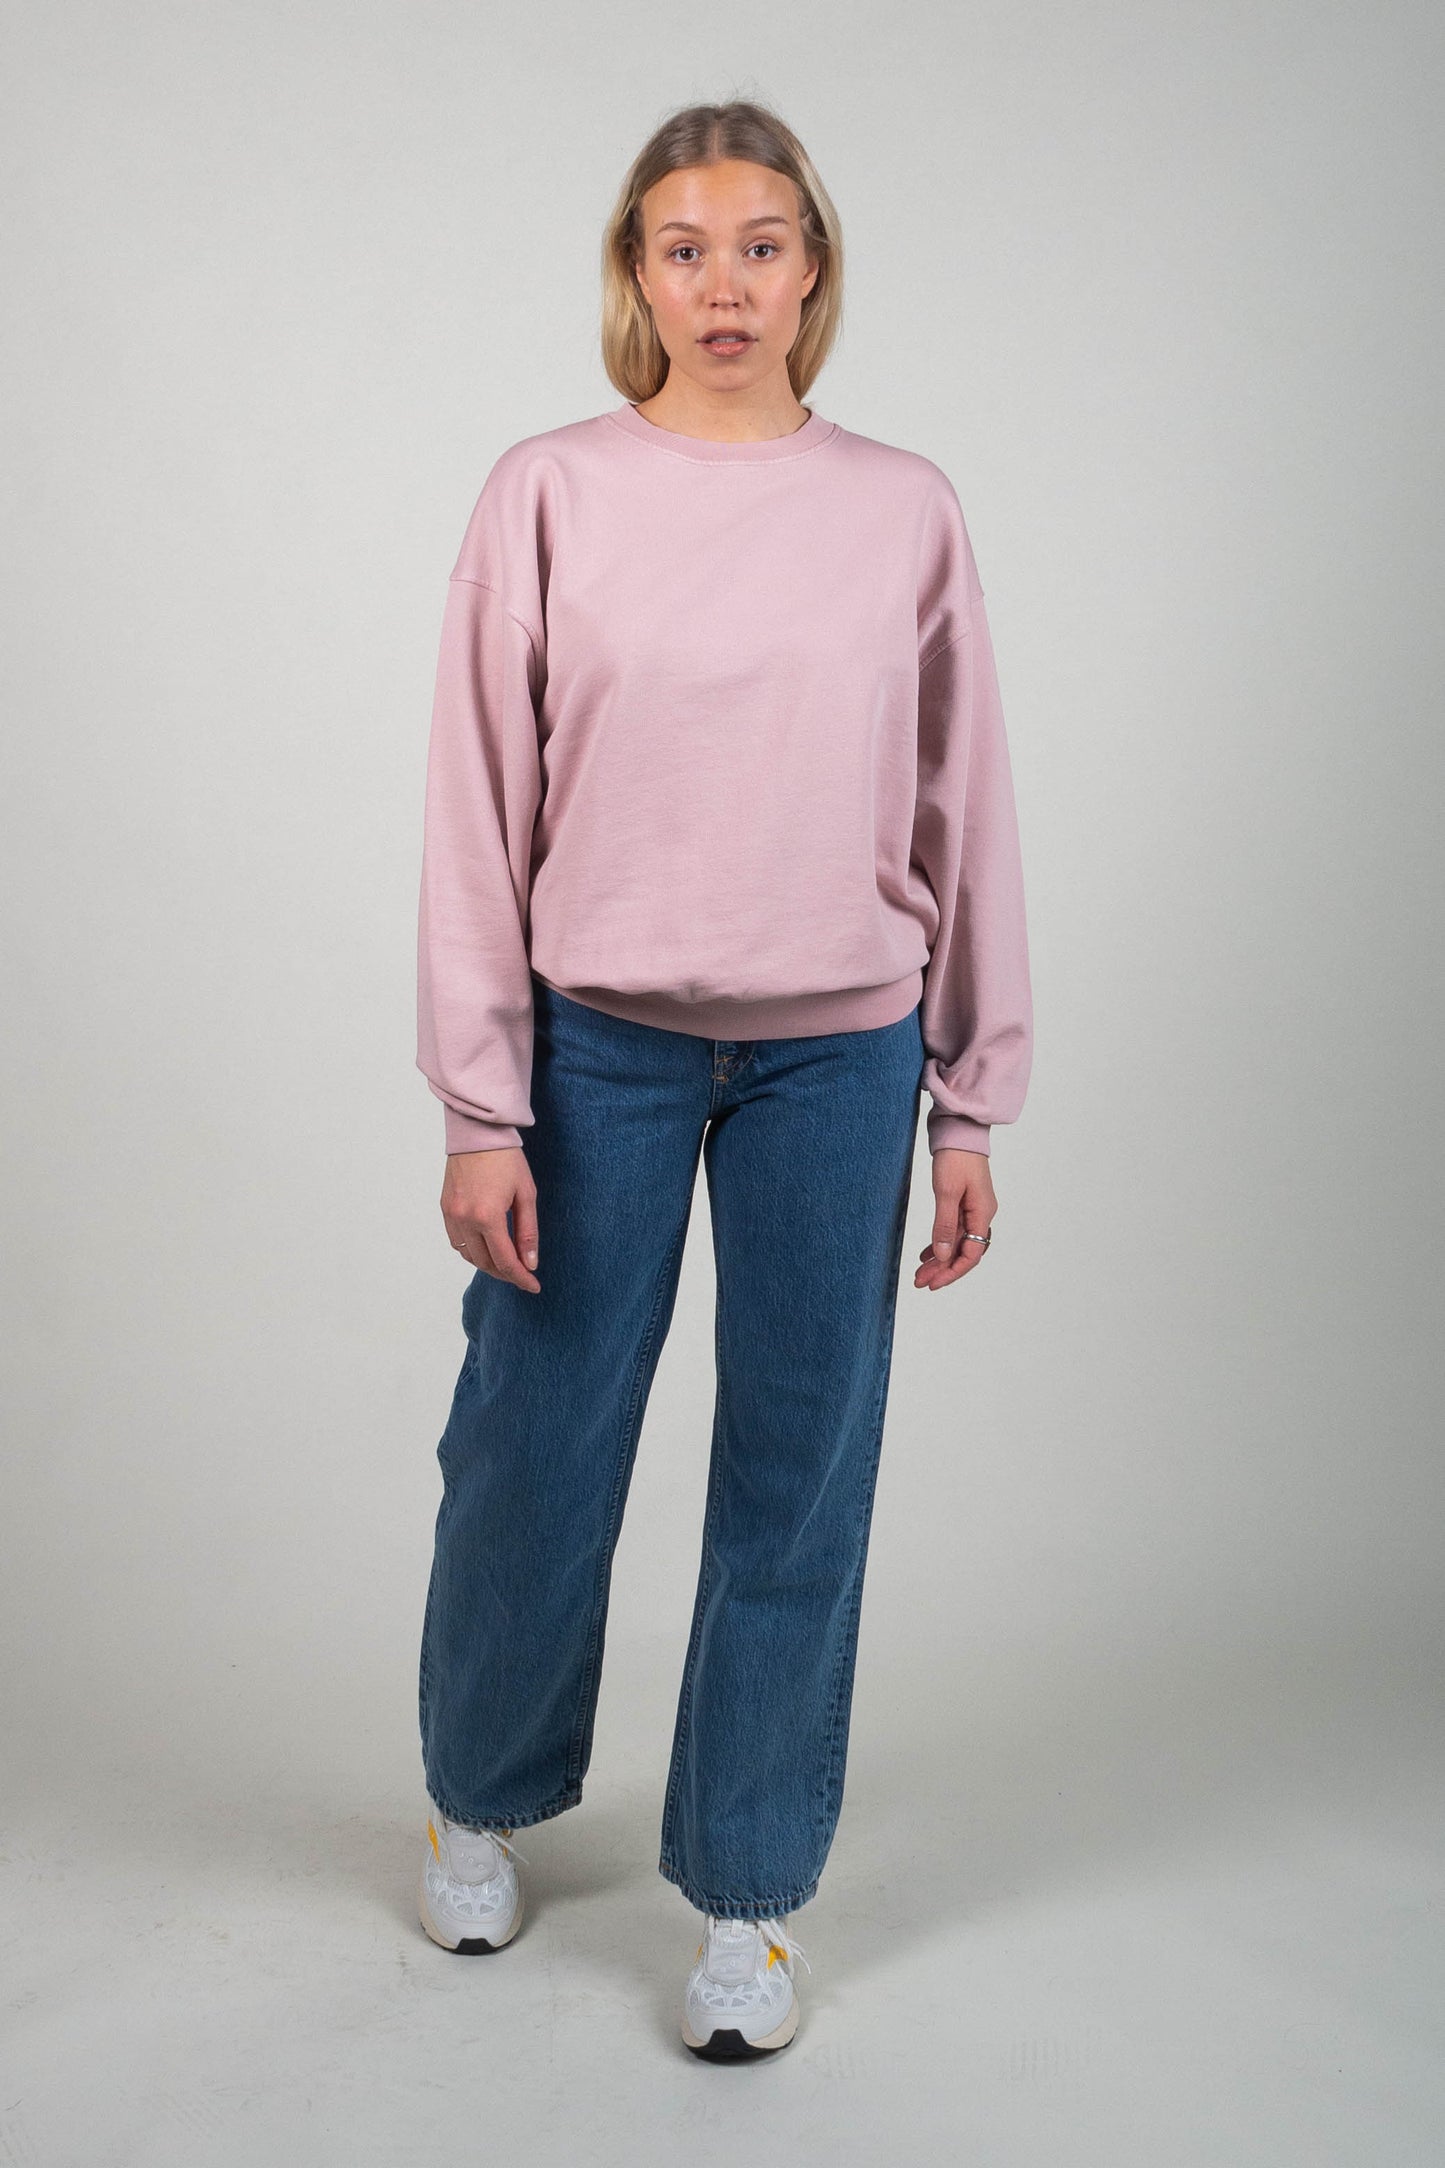 Colorful Standard Classic Organic Oversized Crew - Faded pink